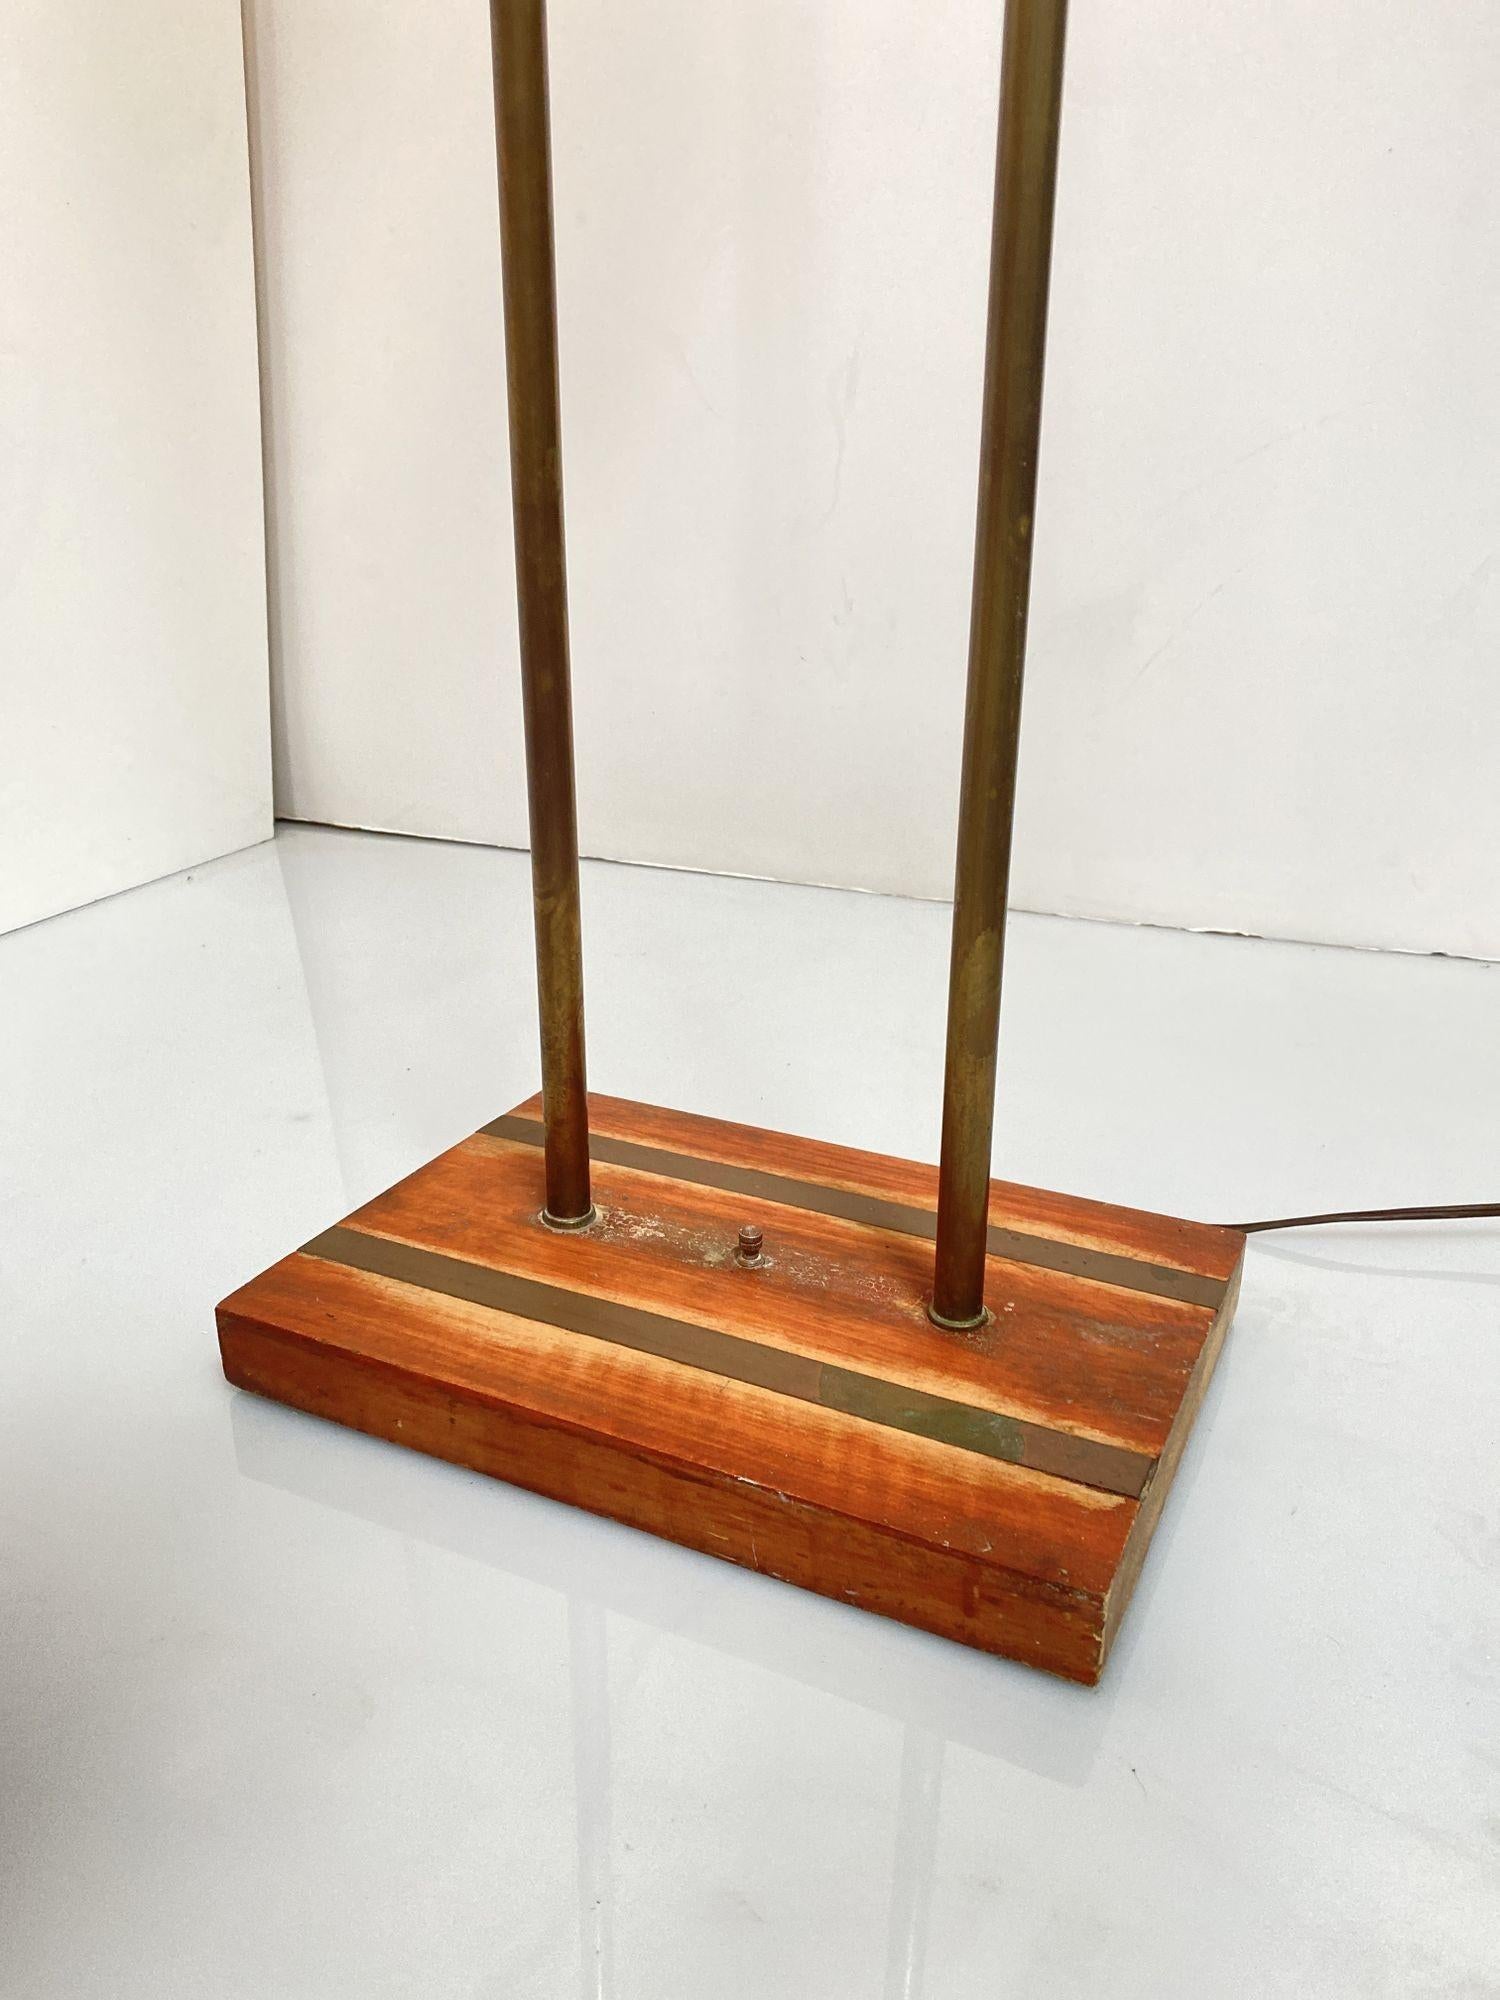 Asymmetric Mid-century Brass torchiere floor Lamp w/ wood base and smoked swirl glass shades
 